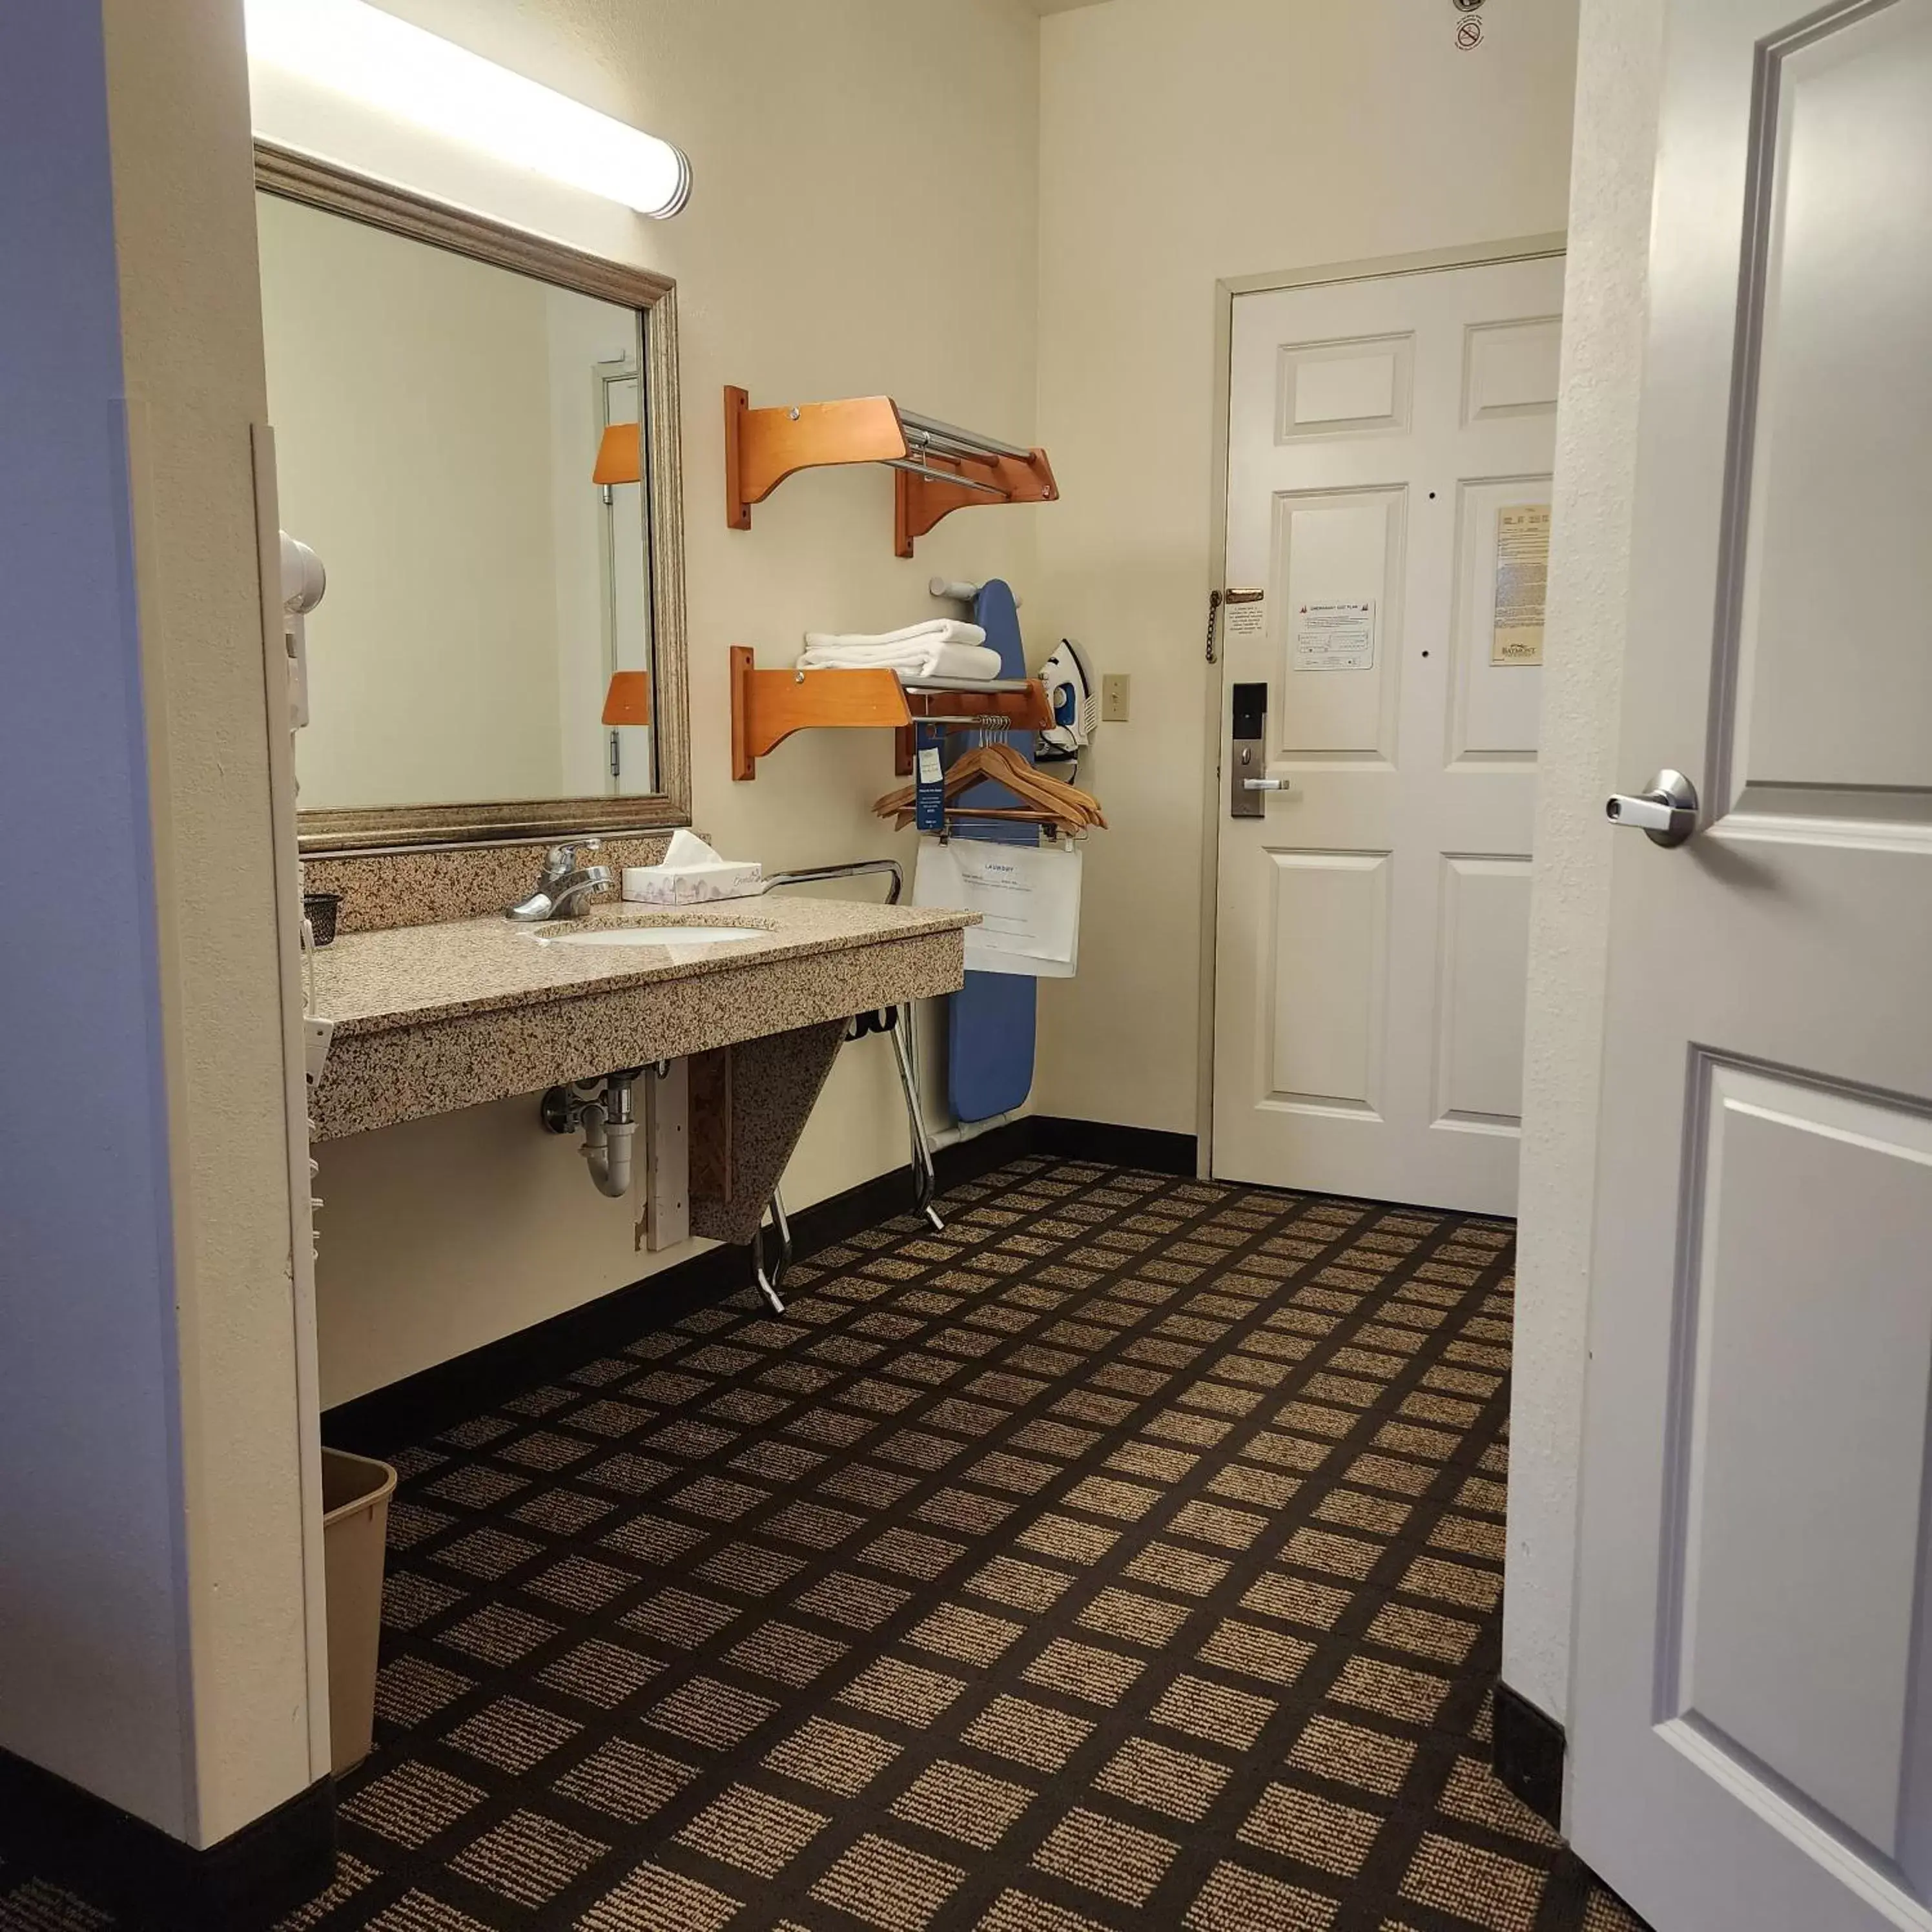 Facility for disabled guests, Bathroom in Baymont by Wyndham Mackinaw City